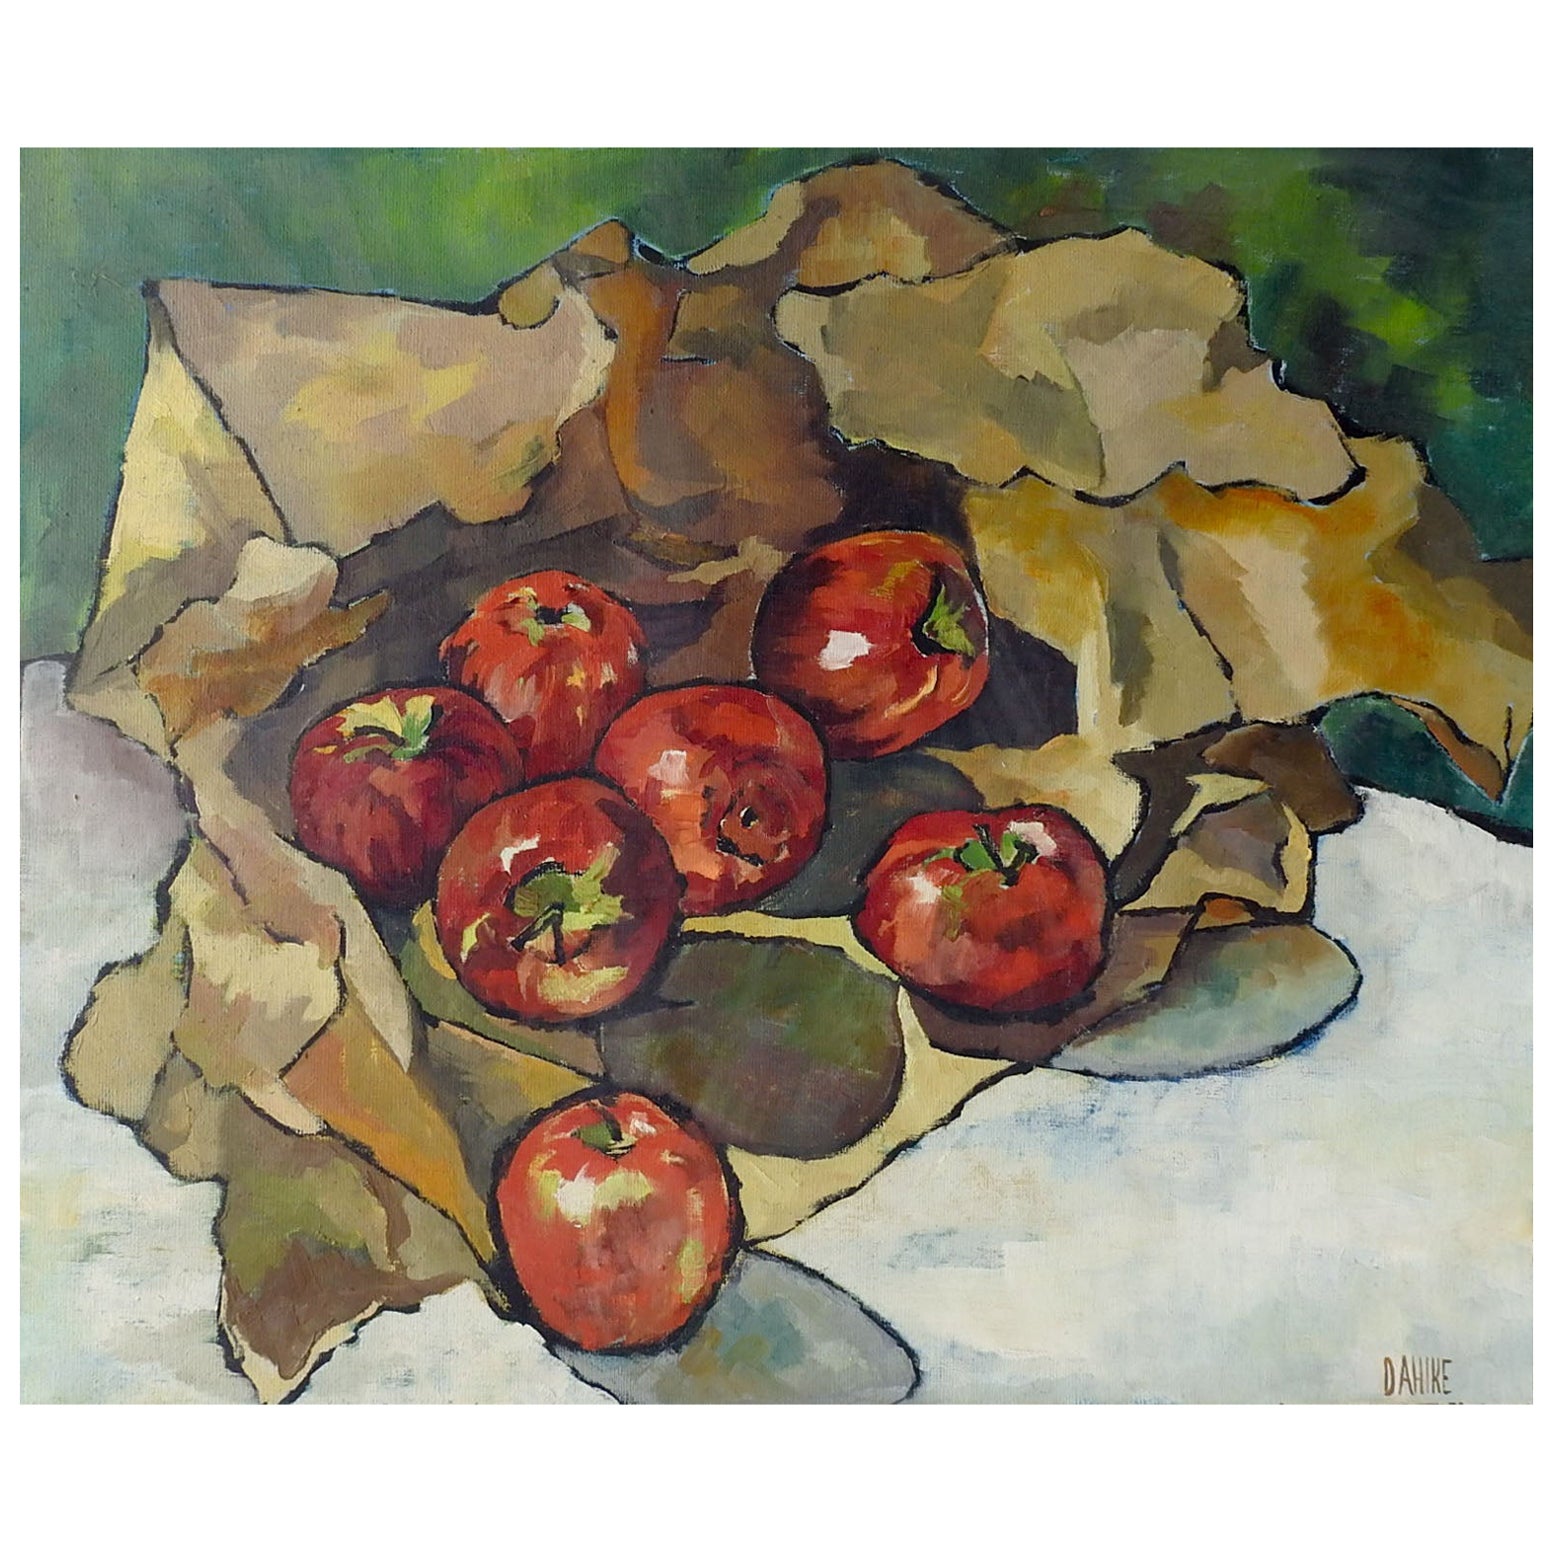 Vintage Modernist Still Life Painting With Apples